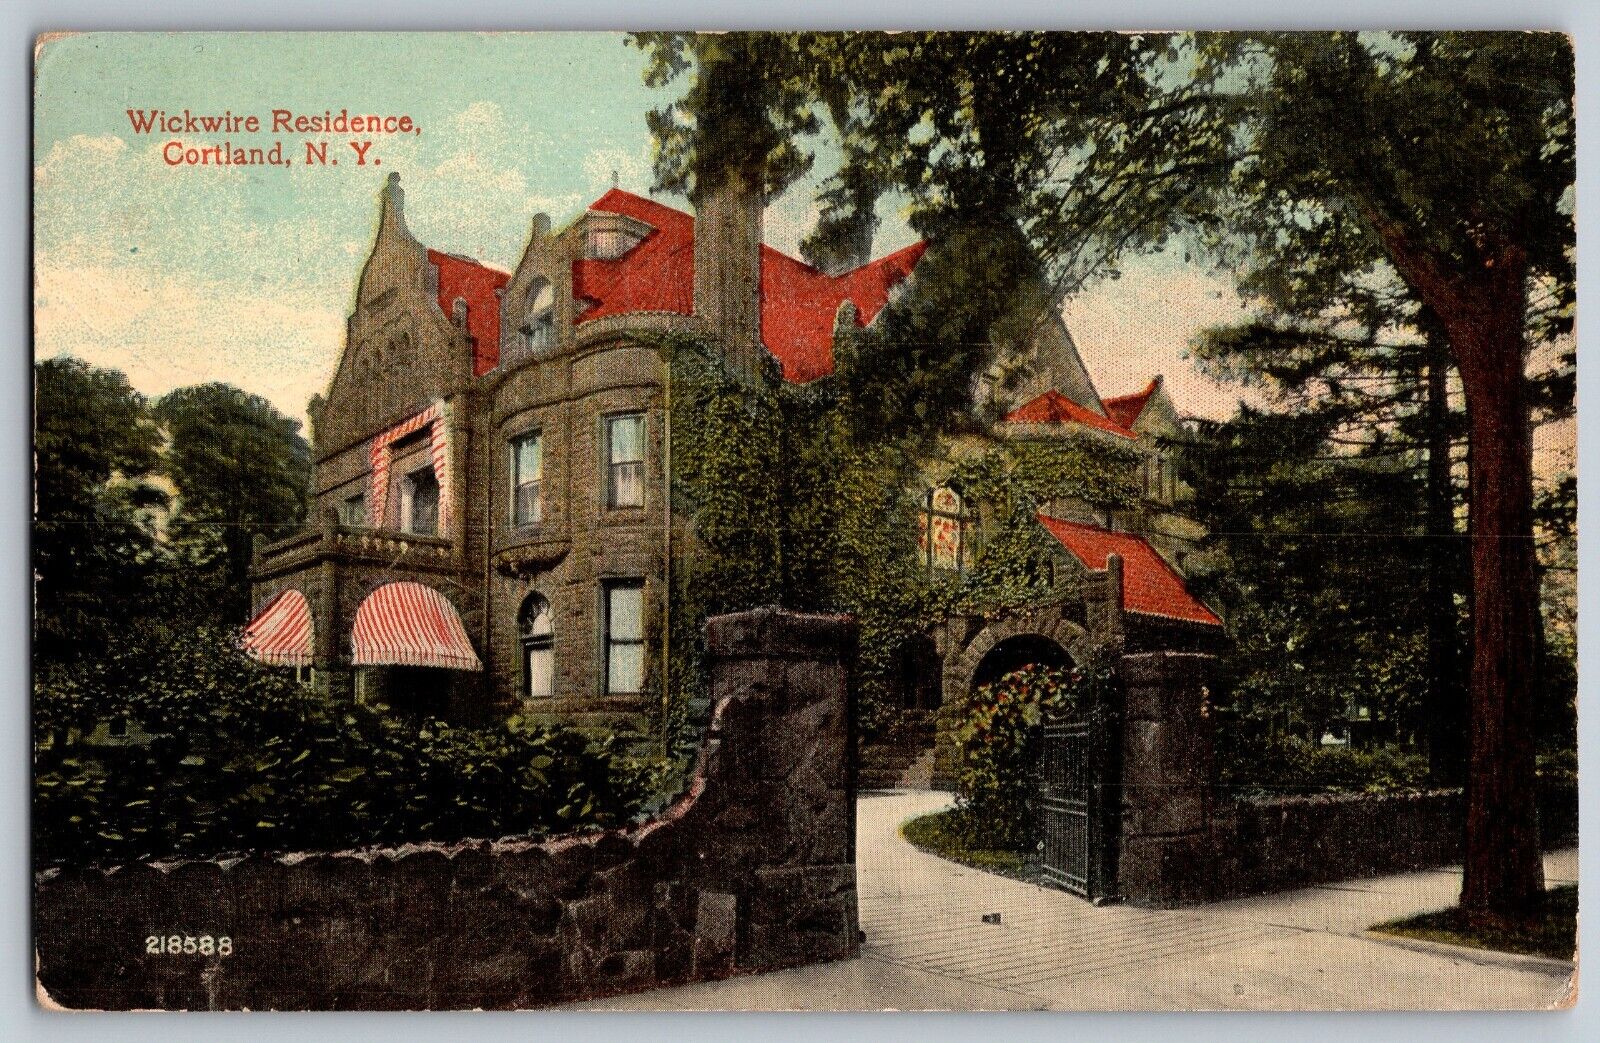 Cortland, New York - Beautiful Wickwire Residence - Vintage Postcards - Posted